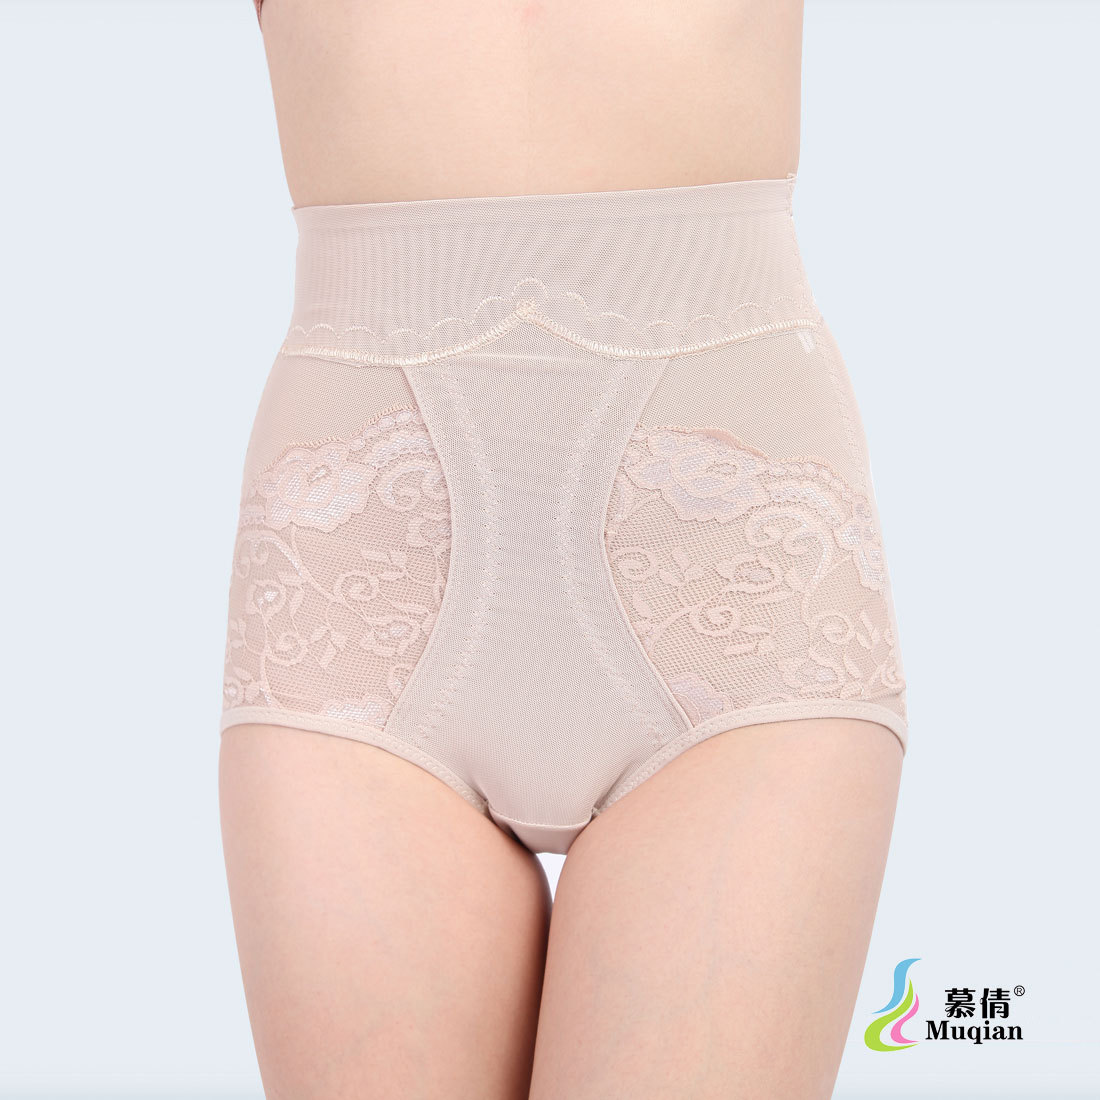 High waist abdomen pants drawing collagen protein gauze breathable body shaping pants beauty care corselets pants 635